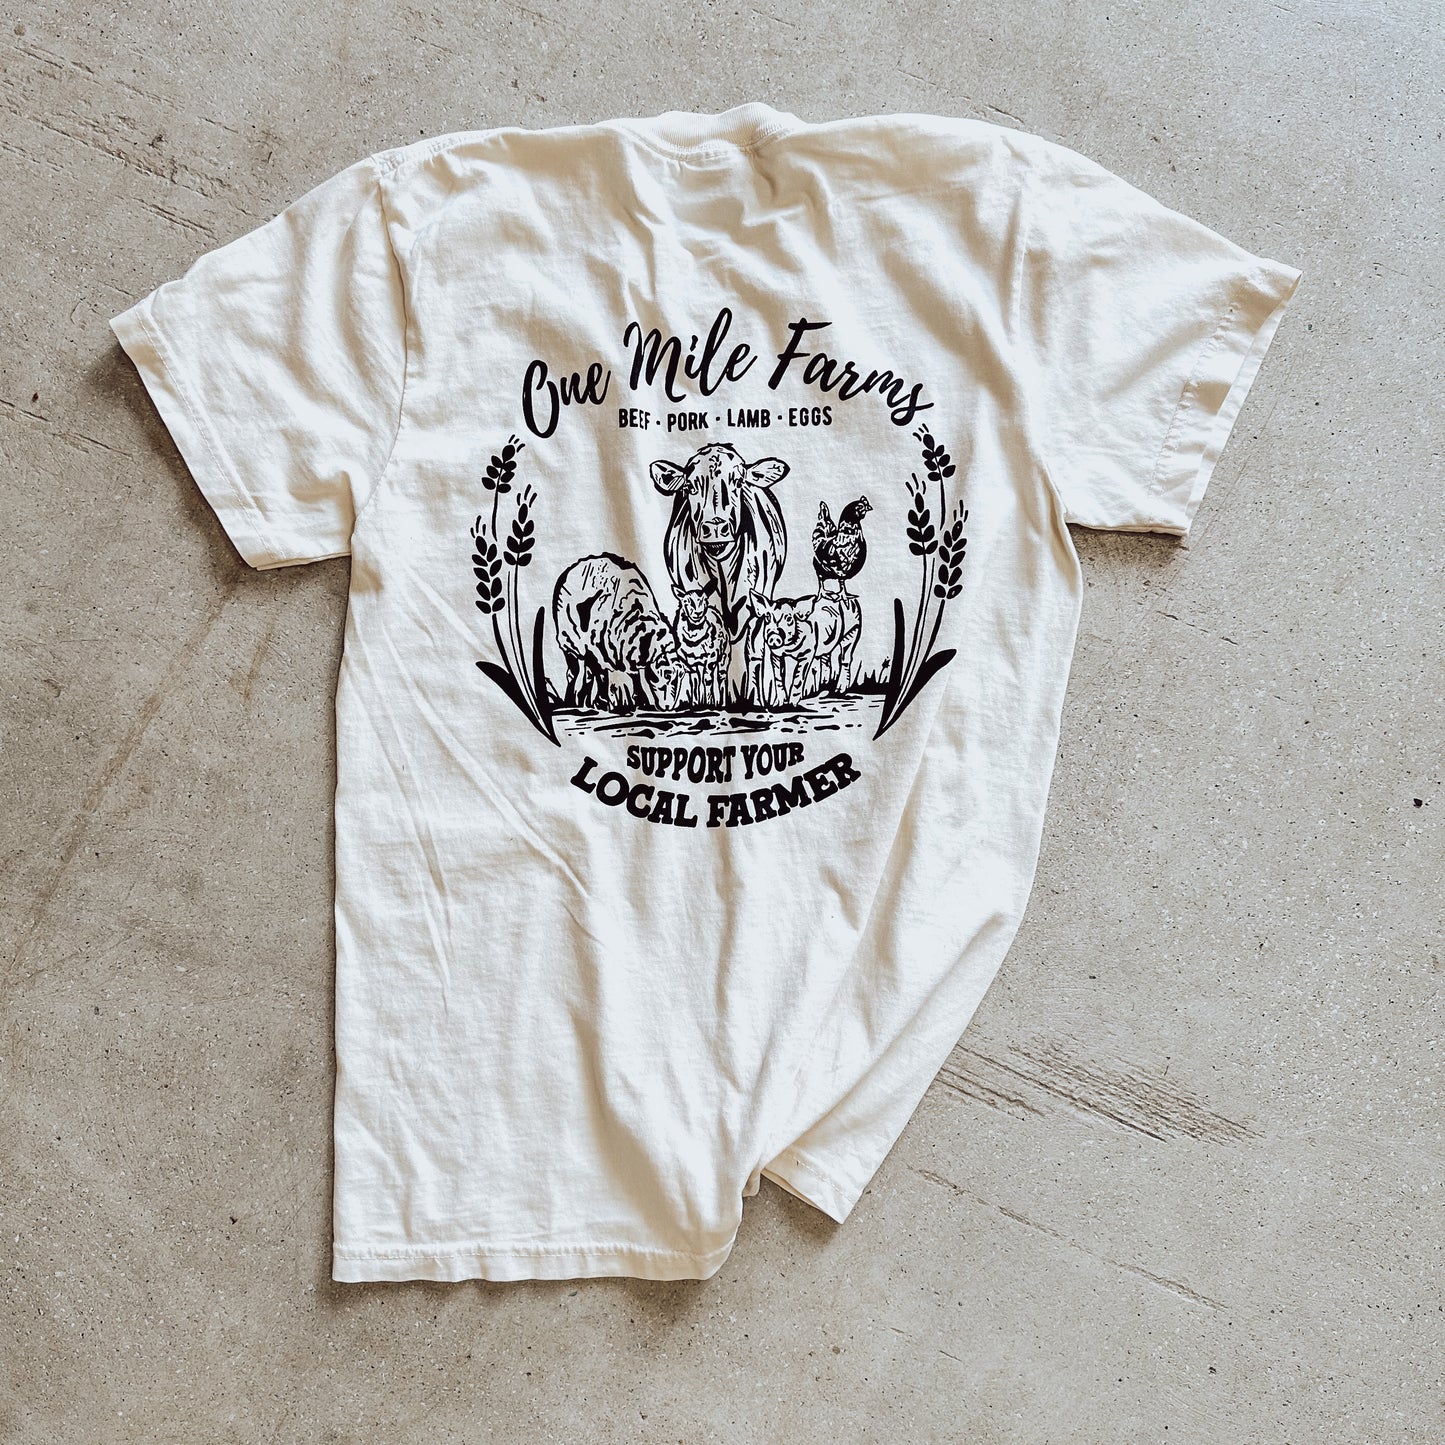 OMF Comfort Cotton T-Shirts | Ivory